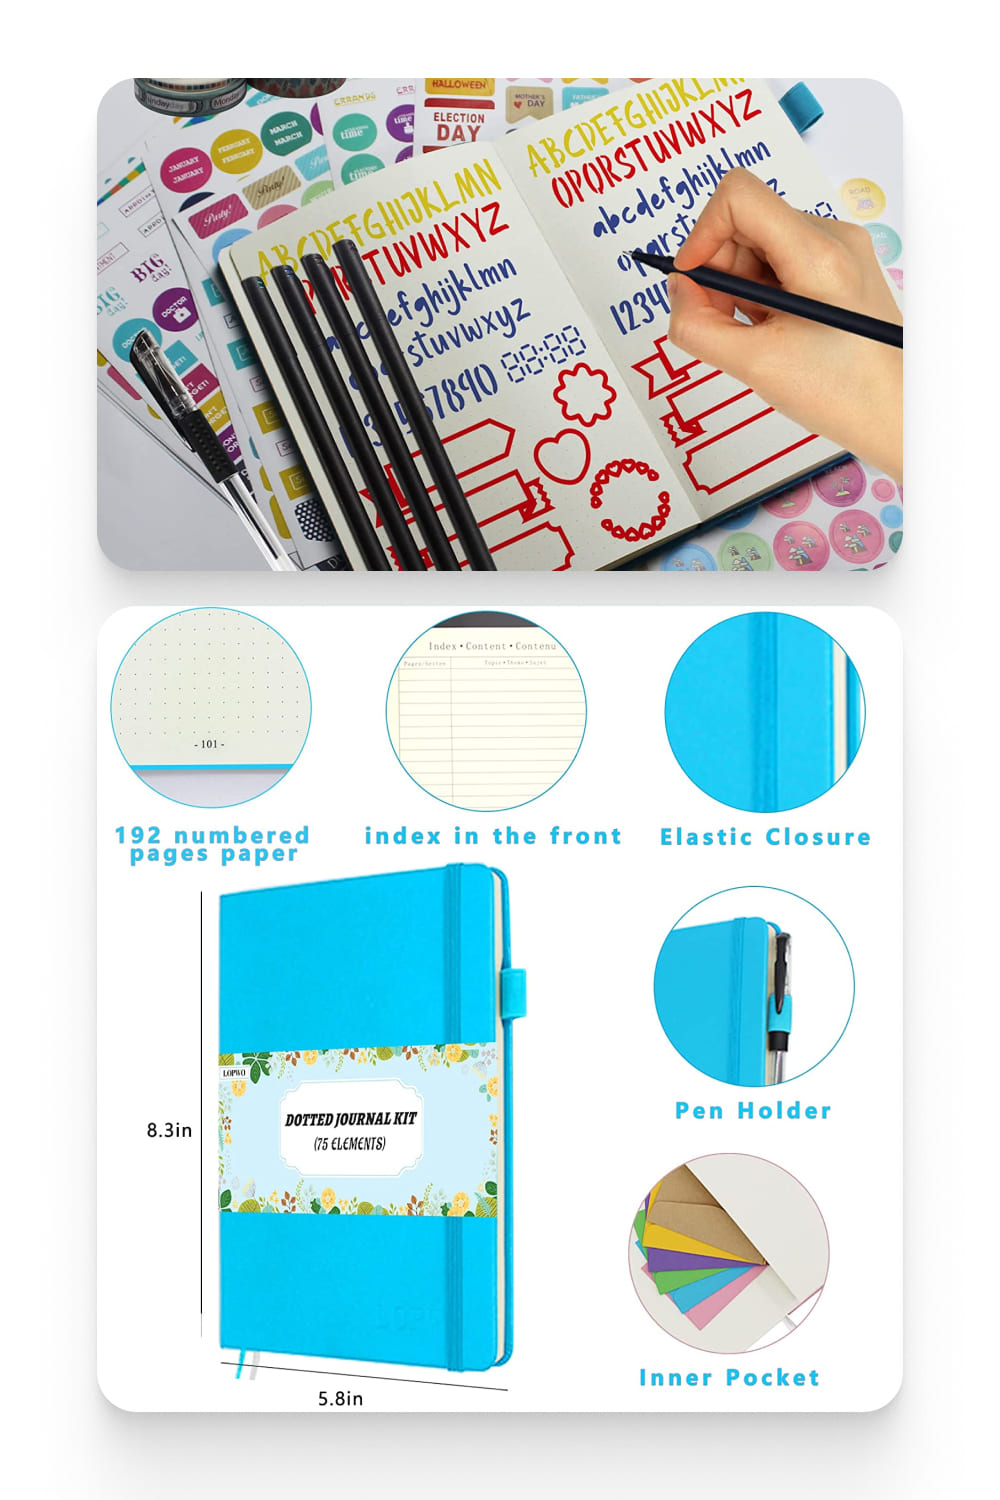 A collage of images of a blue notebook and graphics in it.